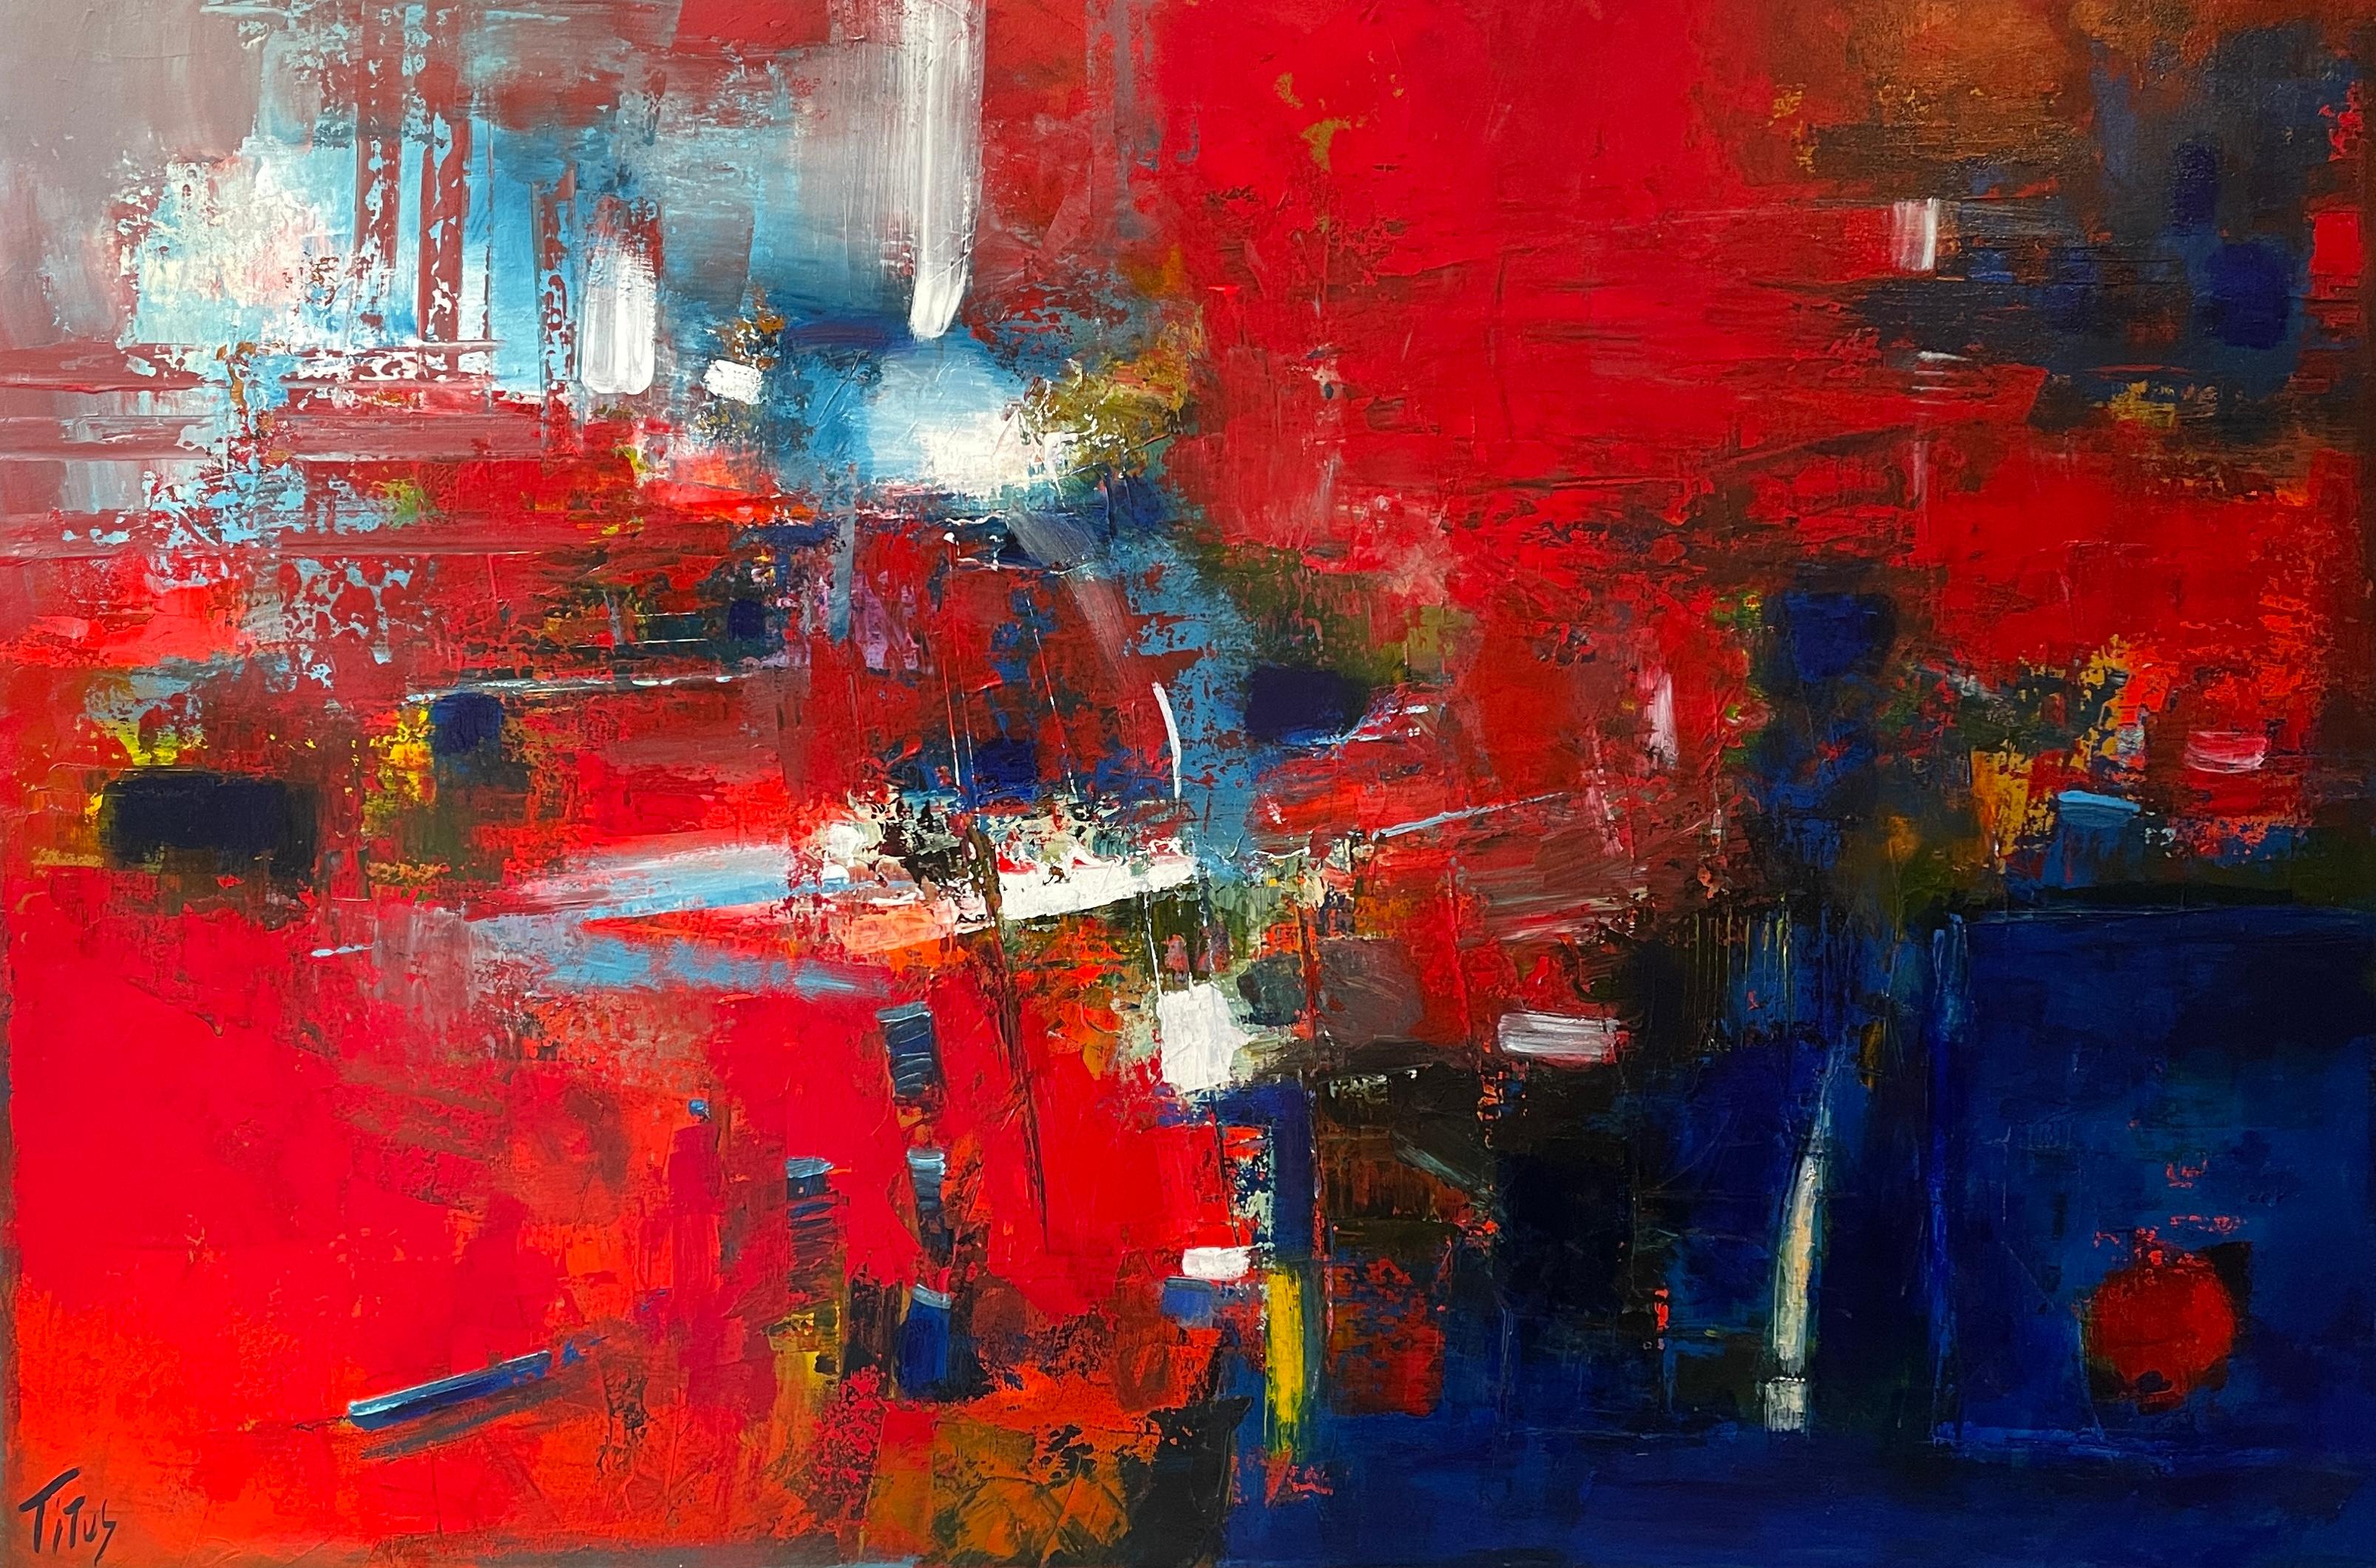 "Pathways" by Mary Titus is a bold and visceral work that captures the essence of abstract expressionism. This 48" x 72" acrylic painting pulses with a spectrum of emotions through its vibrant reds and deep blues, intersected by hints of white and